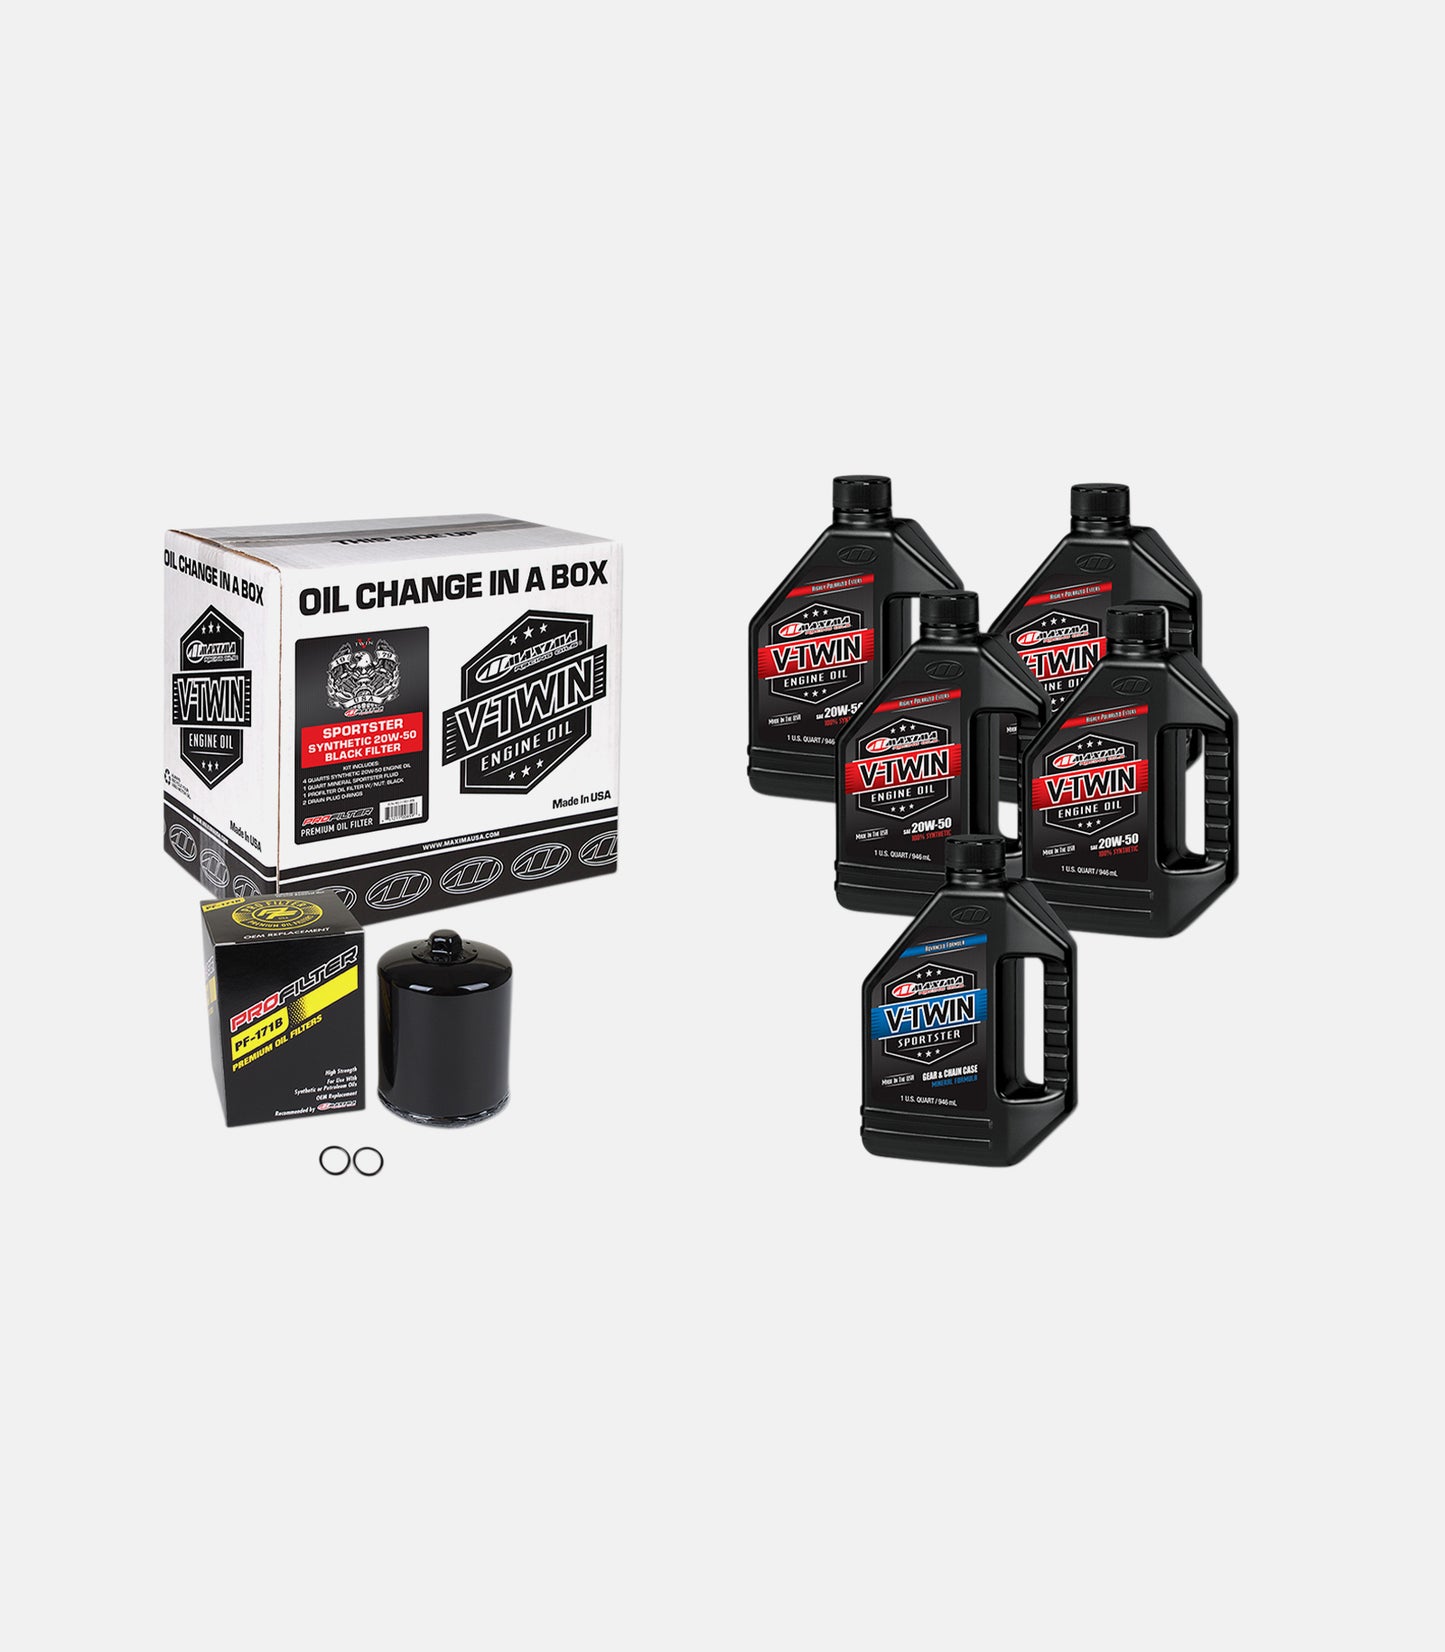 MAXIMA RACING OIL Sportster Synthetic 20W-50 Oil Change Kit - Black Filter